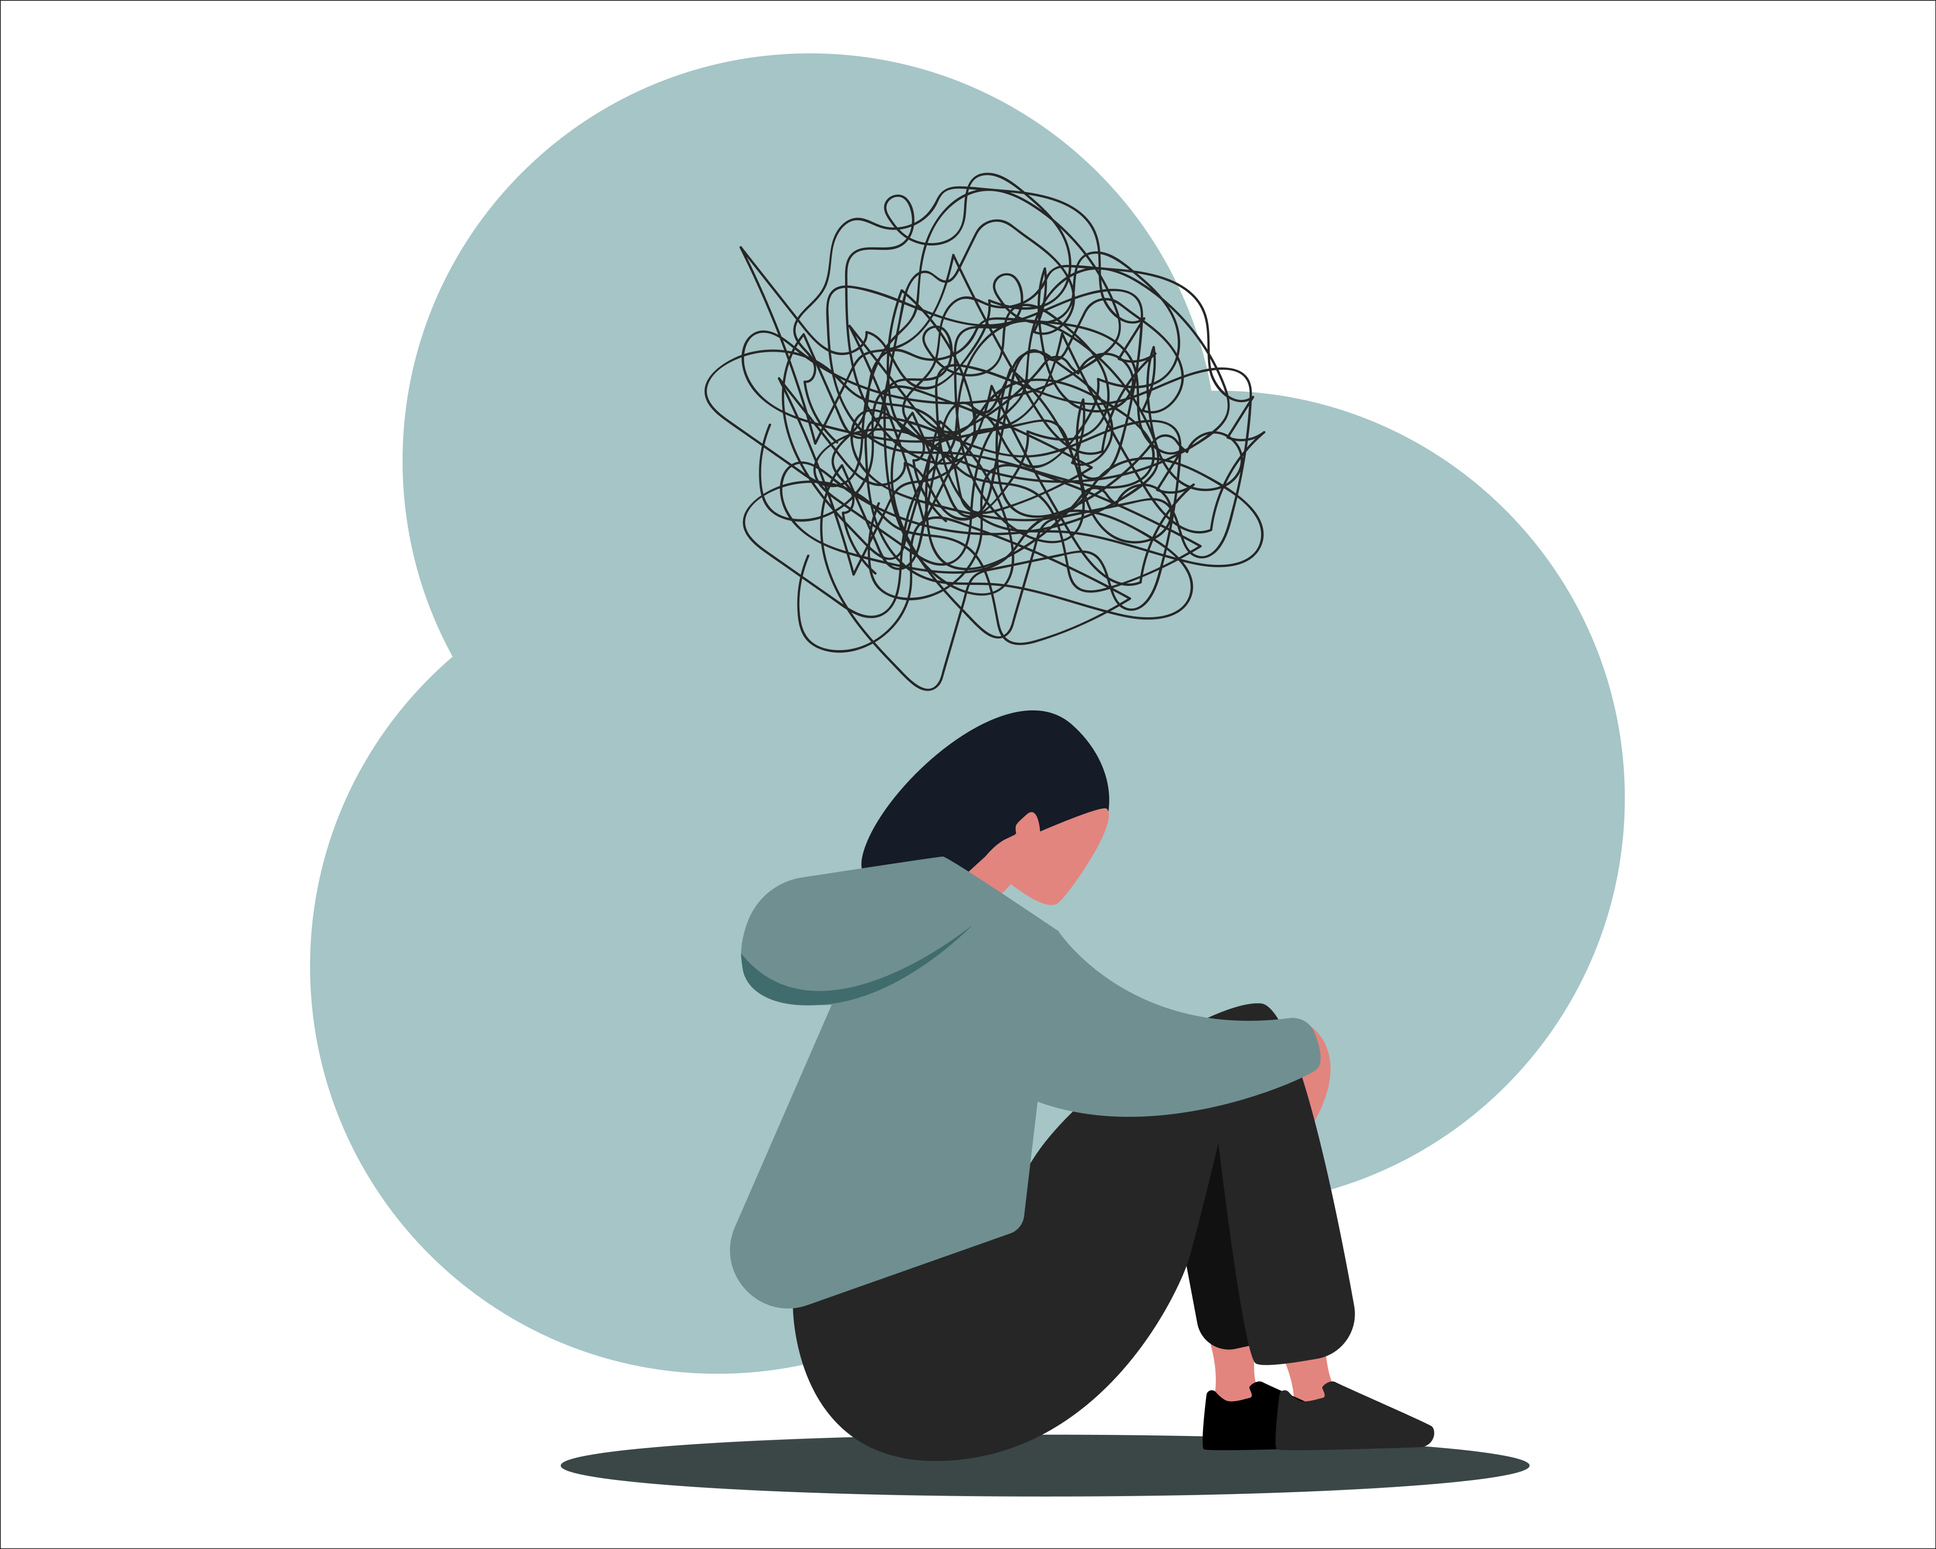 Depressed young person looking isolated with scribbly thought cloud above them vector illustration in flat style